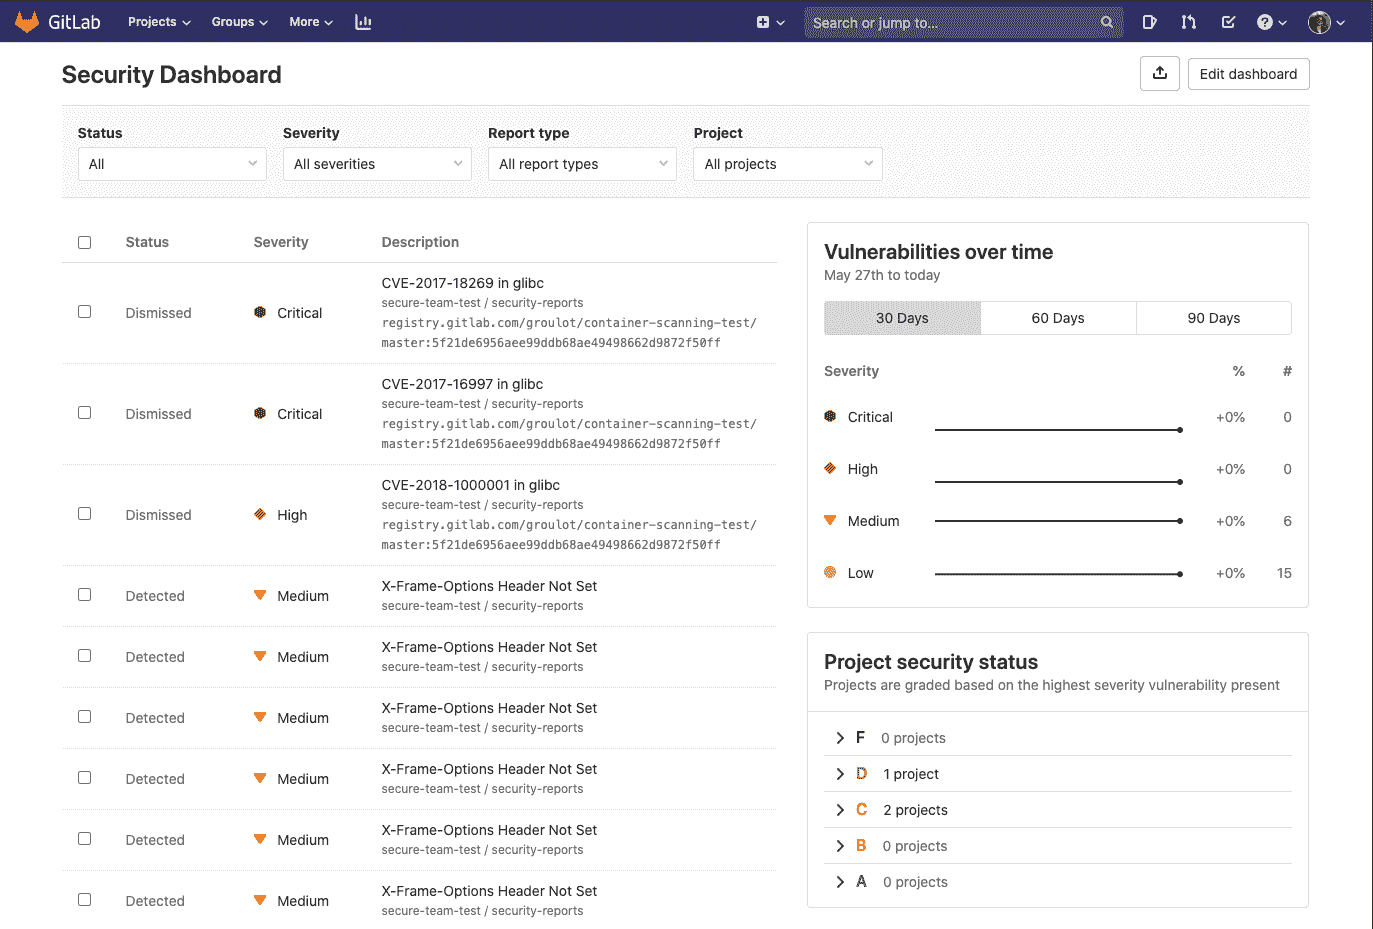 Instance Security Dashboard with projects